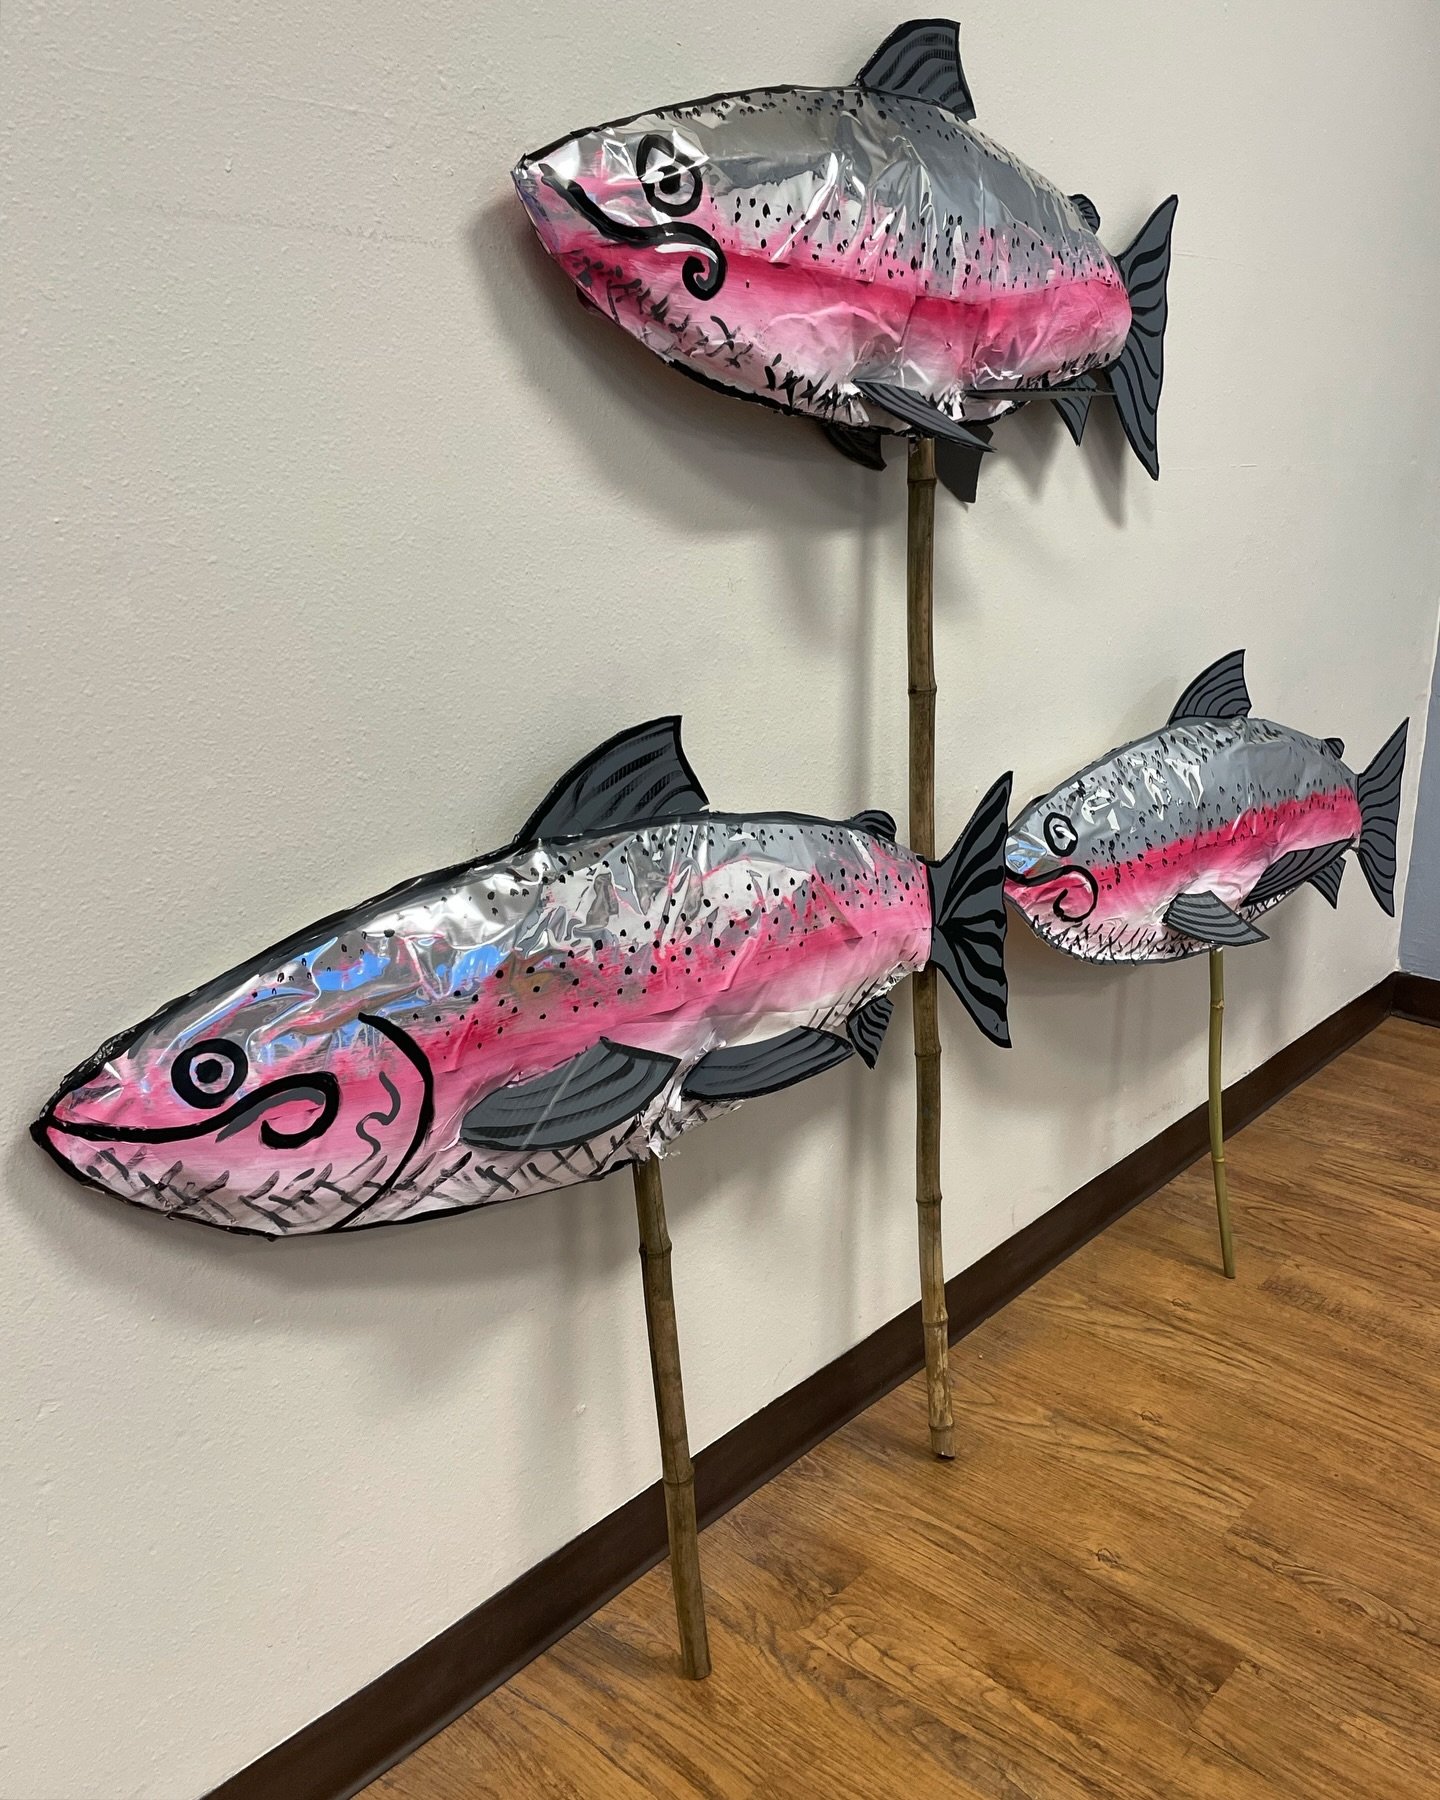 🌿🐟 Wild Things Festival is just 5 days away! Get ready to march alongside the majestic salmon puppets in the parade! 🎉 These puppets have been the result of an ongoing community art project! Created by Yachats artist Michael Guerriero and brought 